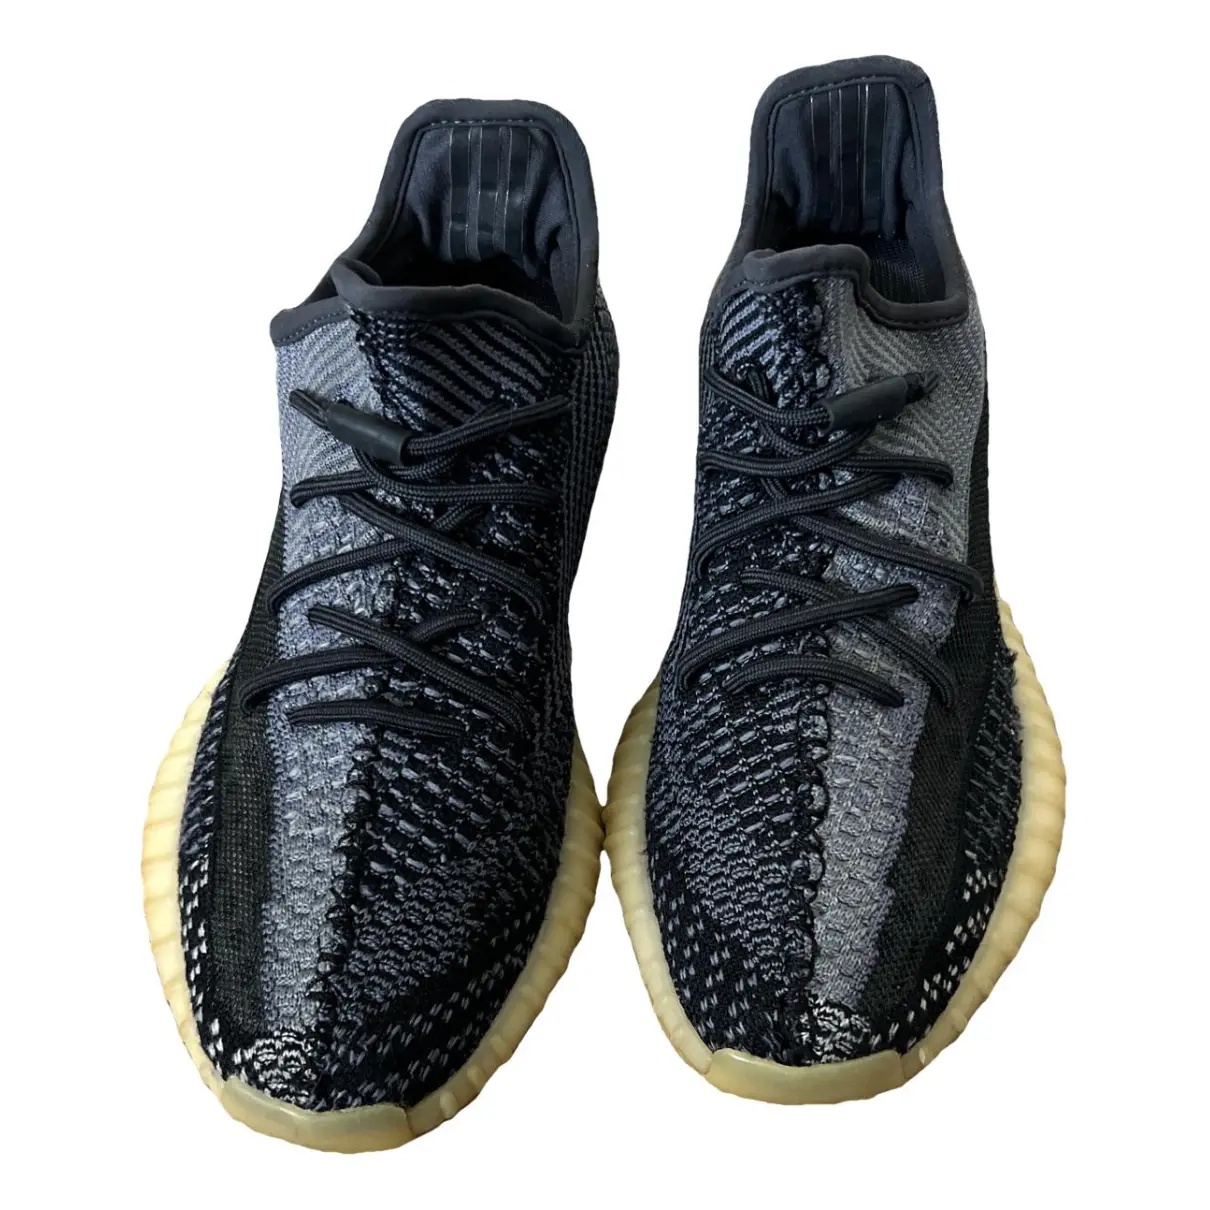 Boost 350 V2 cloth low trainers